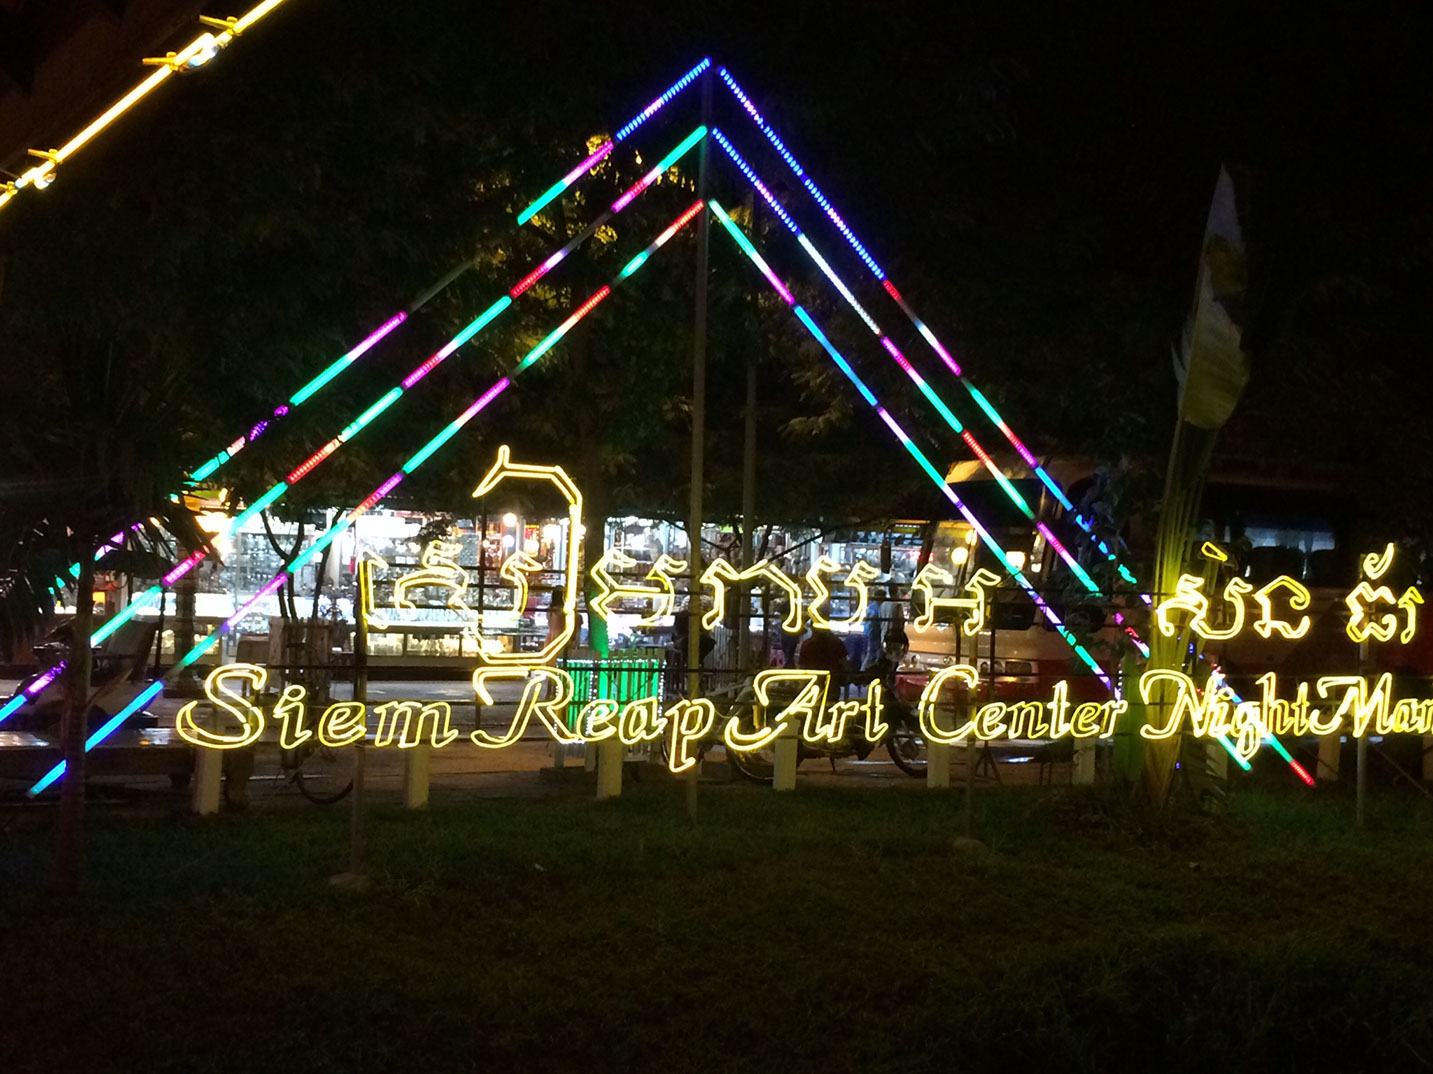 The entrance to the Siem Reap Art Center Night Market